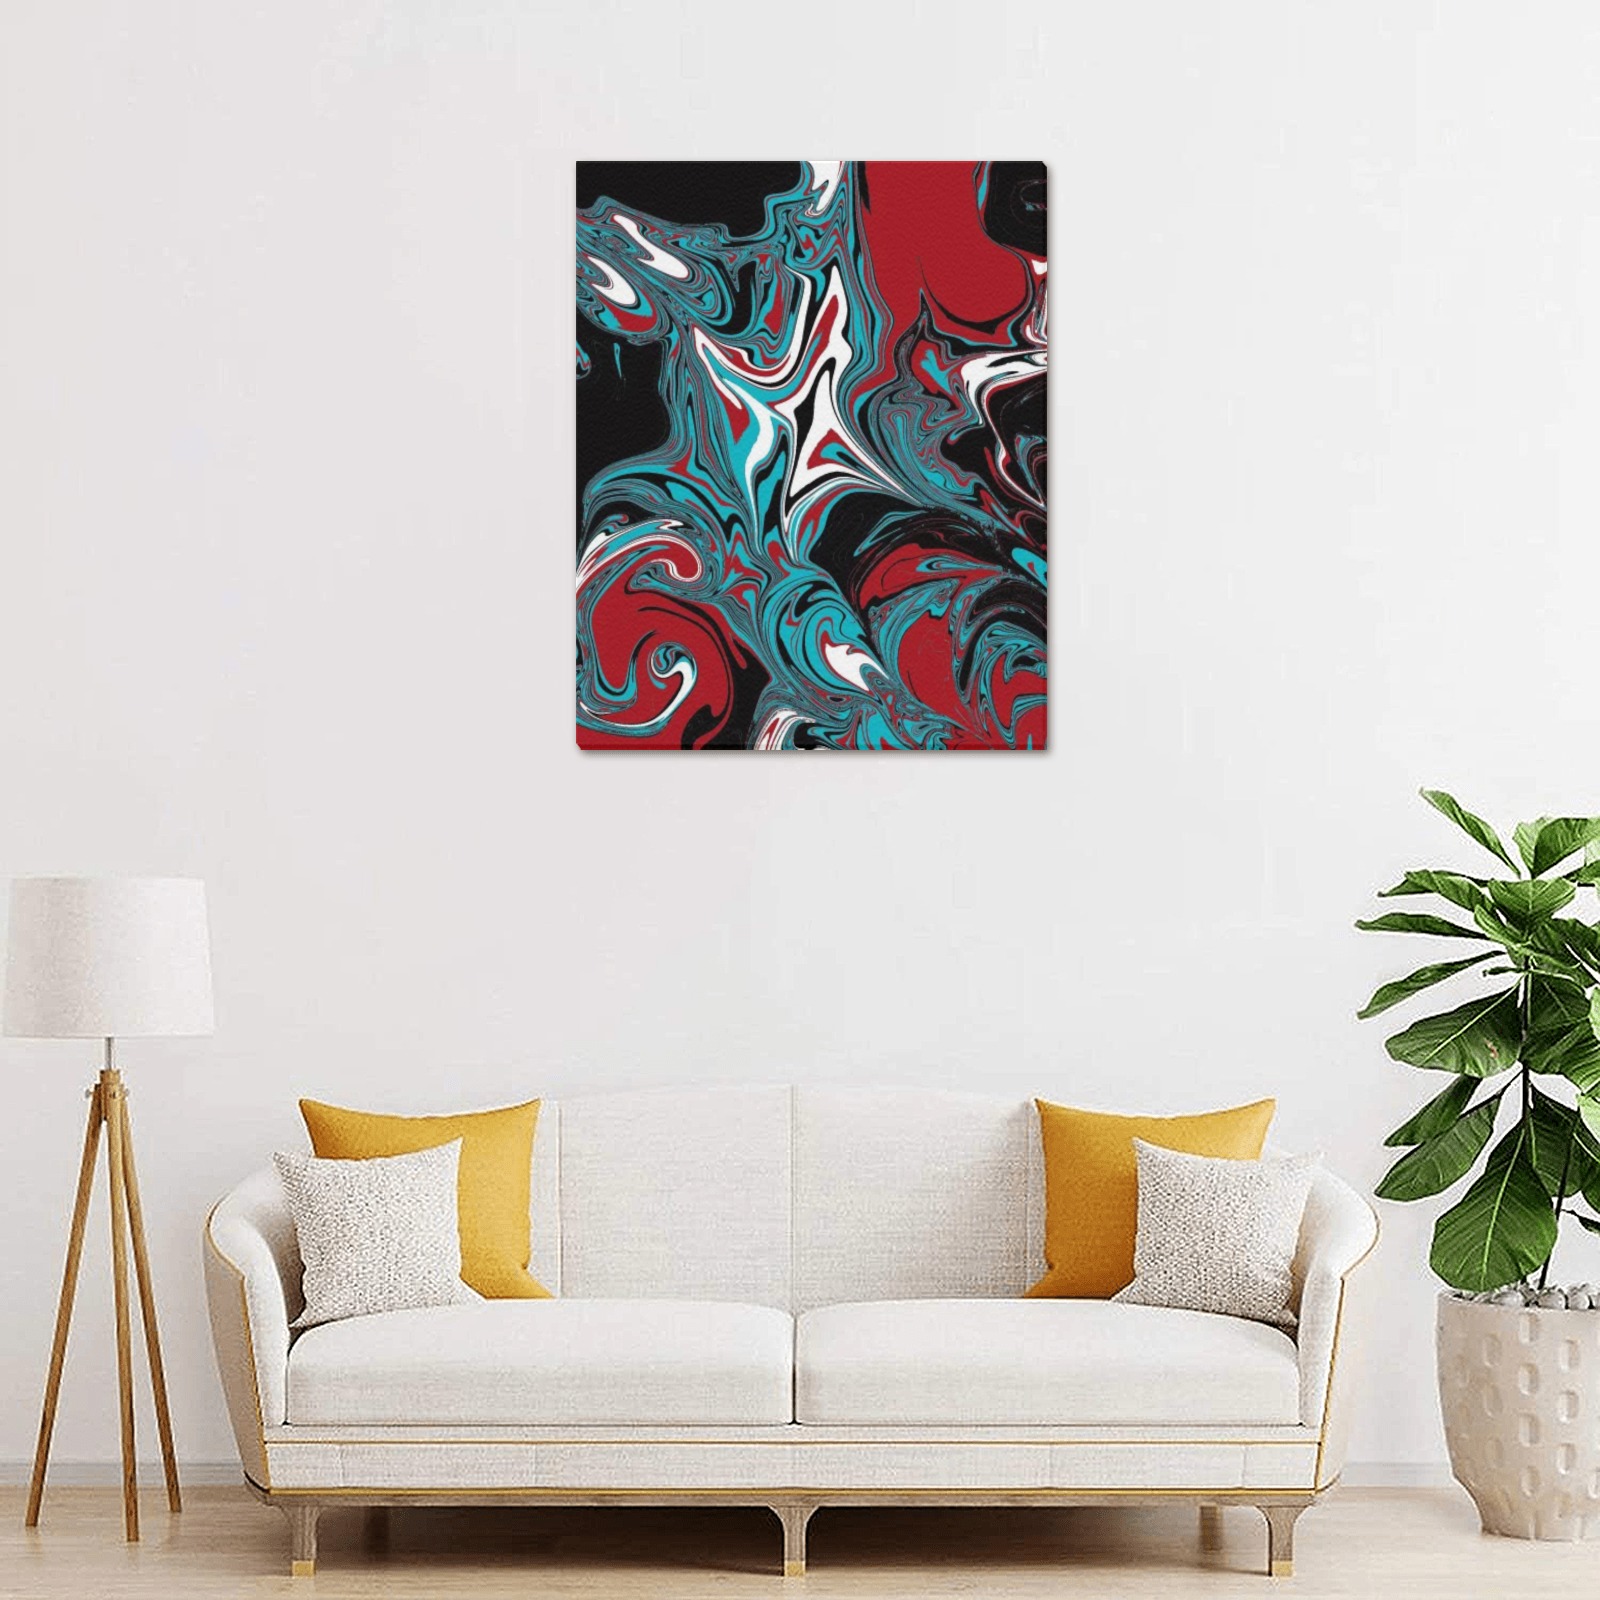 Dark Wave of Colors Frame Canvas Print 16"x20"